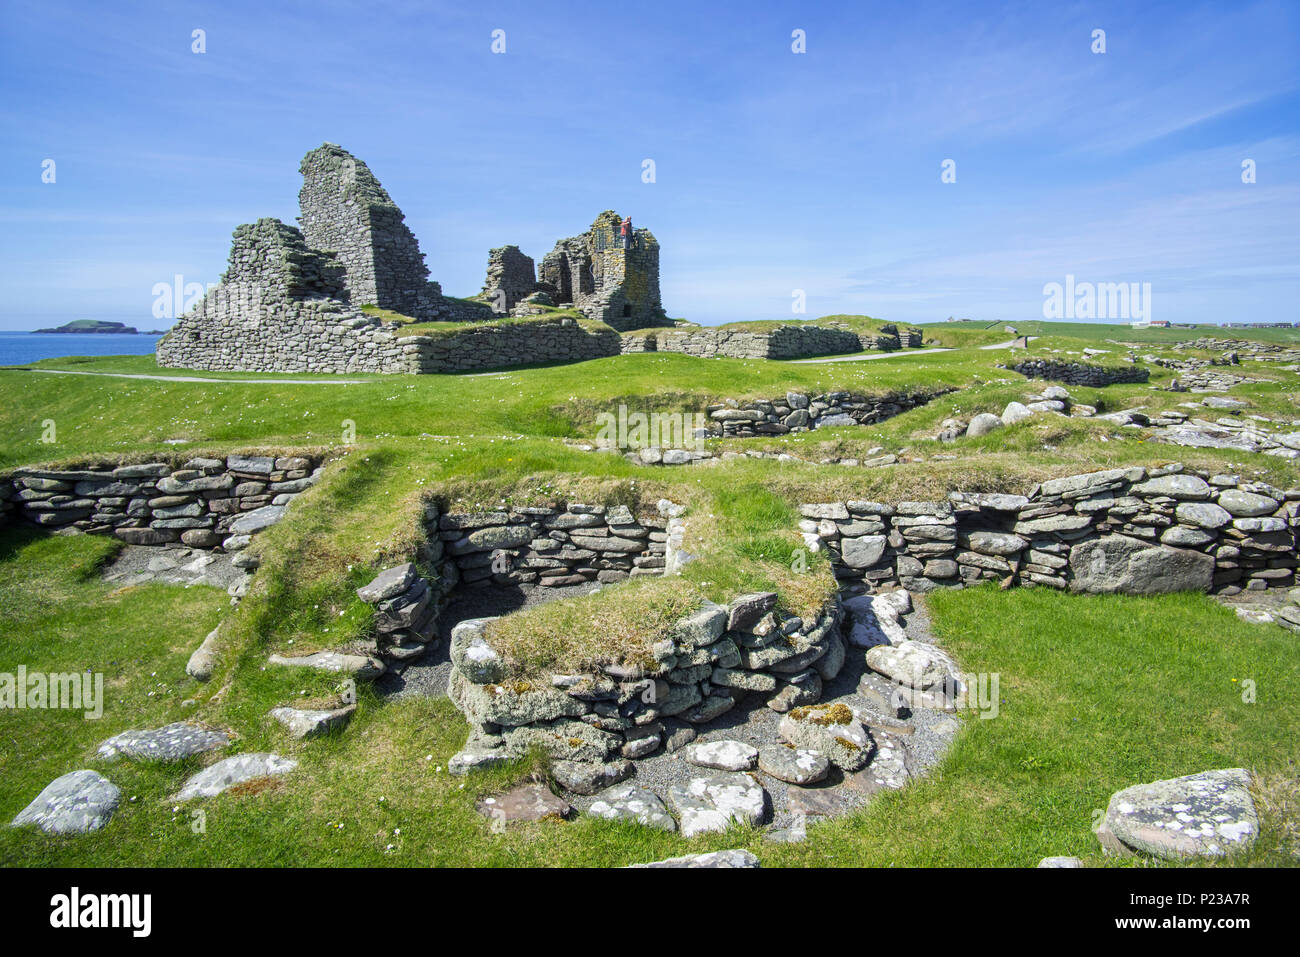 Remains of medieval farm and 17th century laird’s house at Jarlshof, archaeological site at Sumburgh Head, Shetland Islands, Scotland, UK Stock Photo